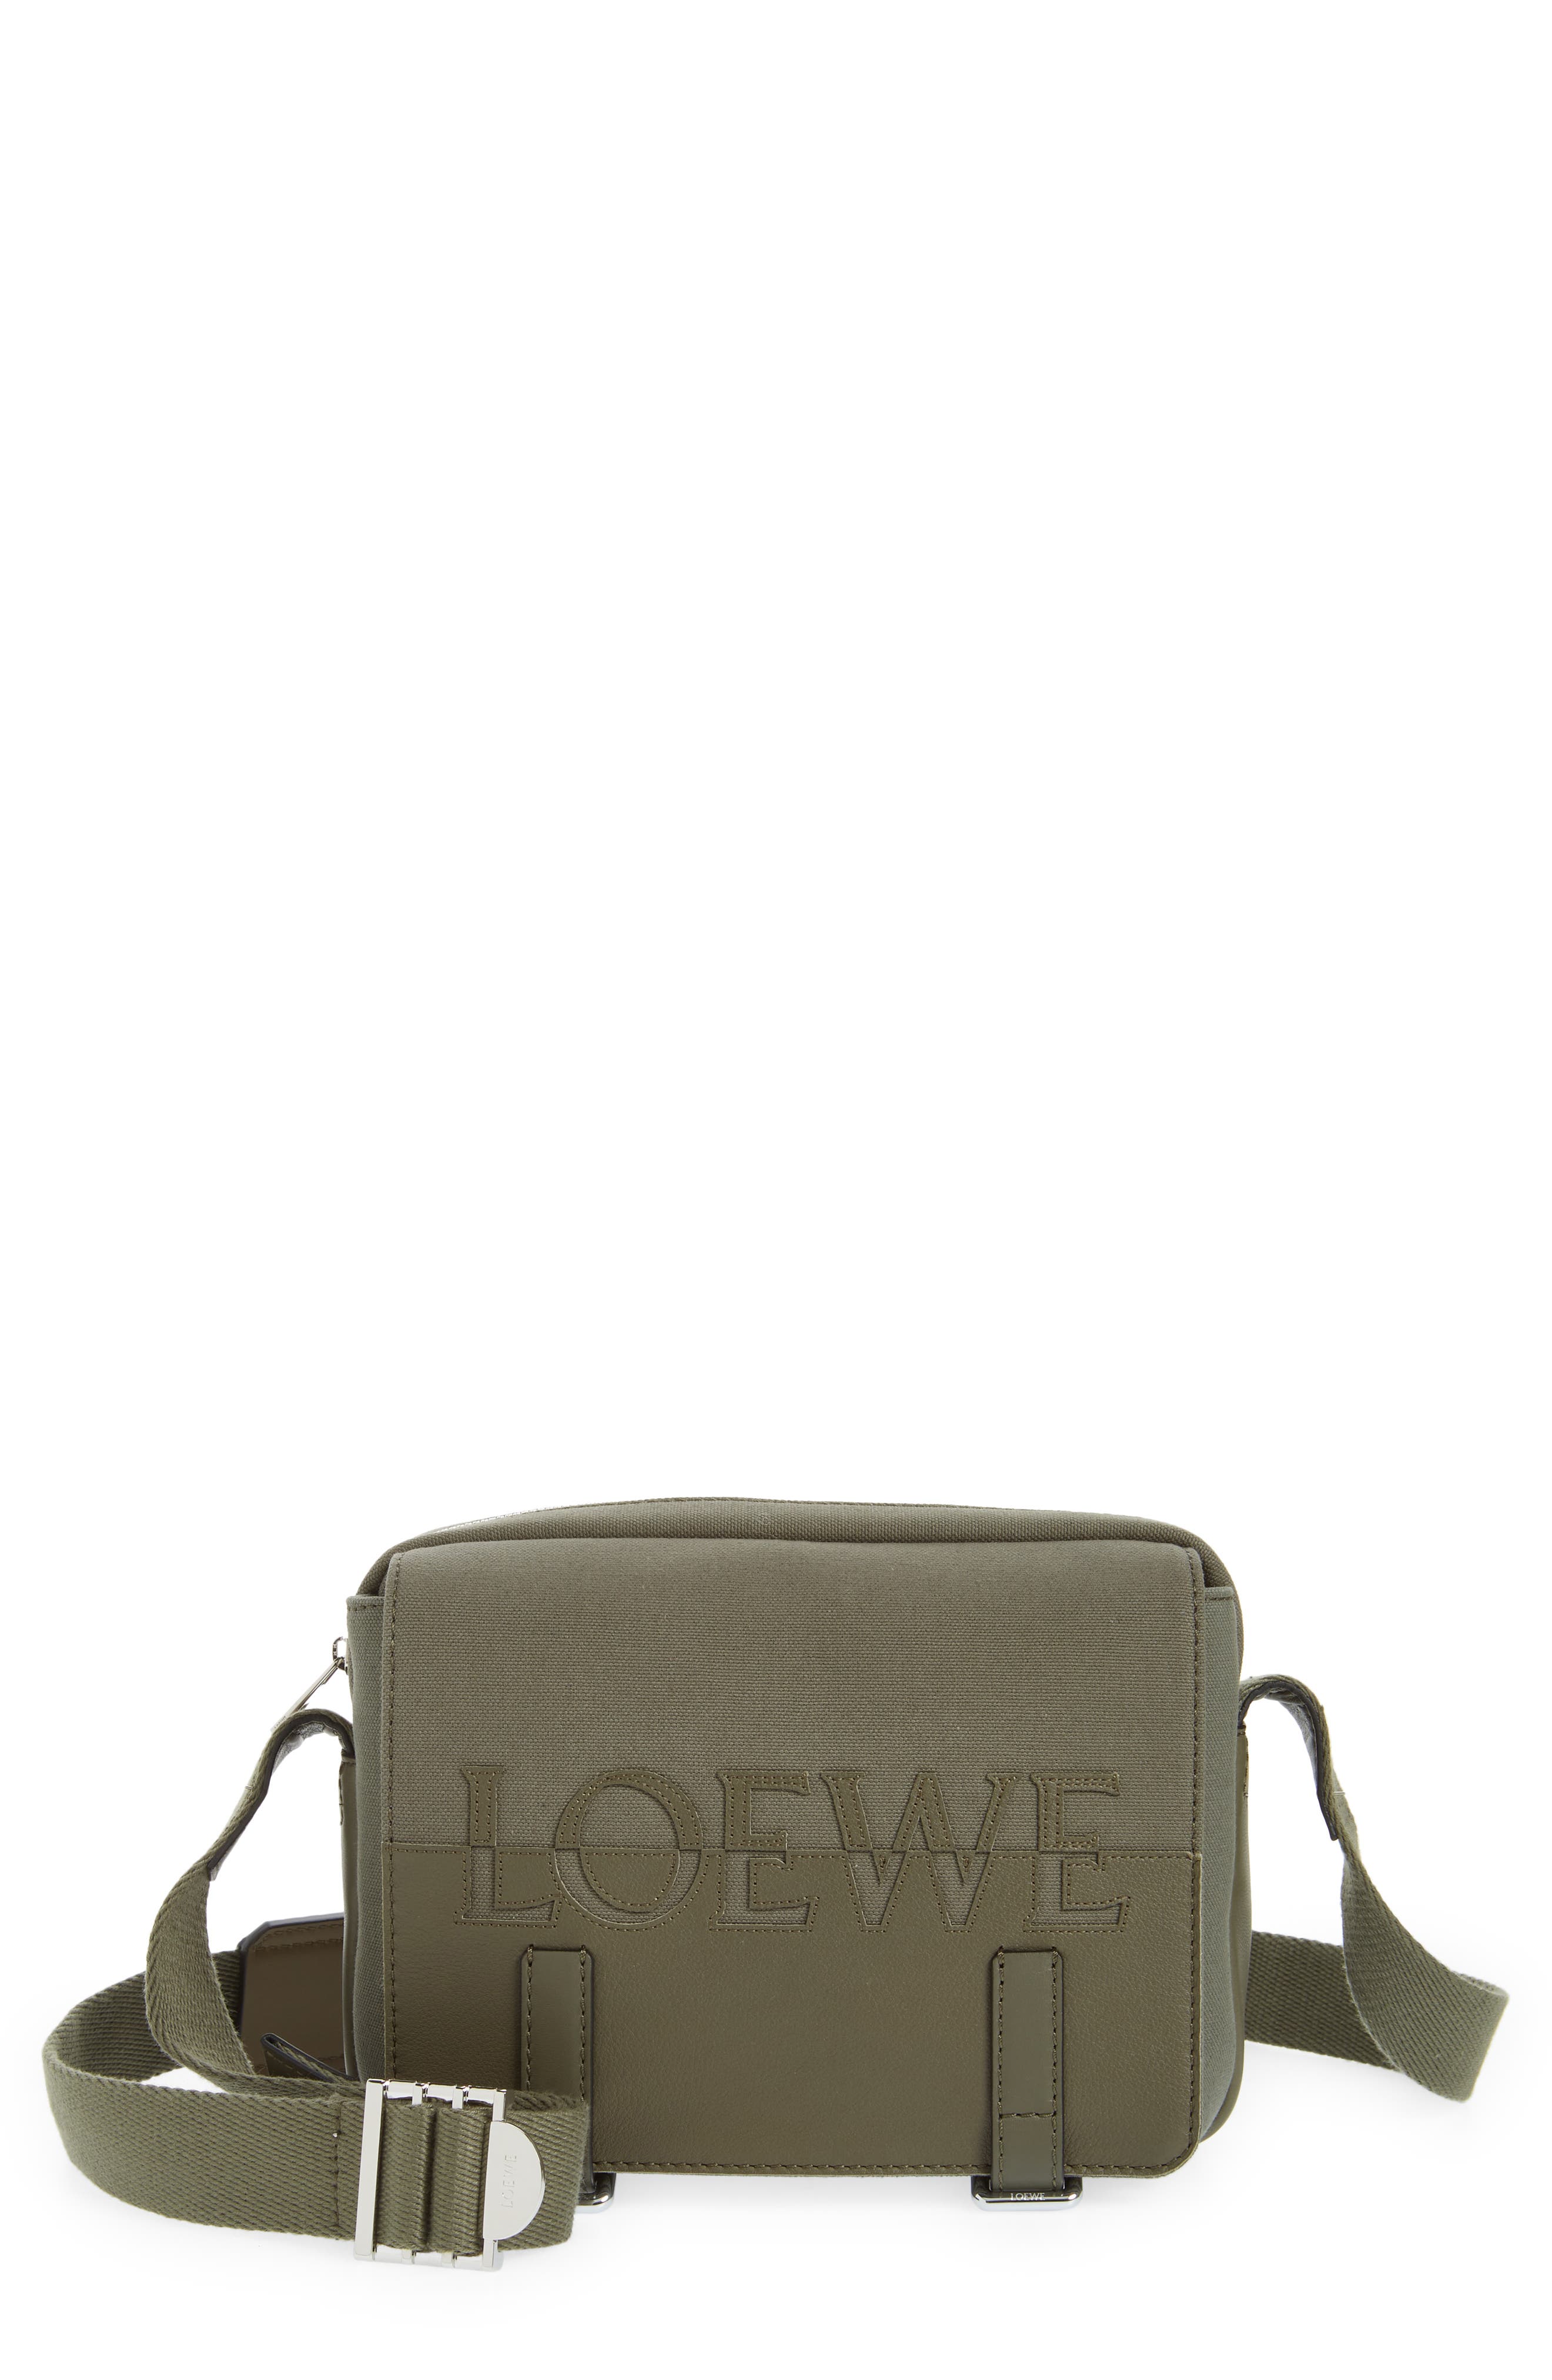 Loewe Extra Small Military Logo Leather & Canvas Messenger Bag in Khaki Green at Nordstrom